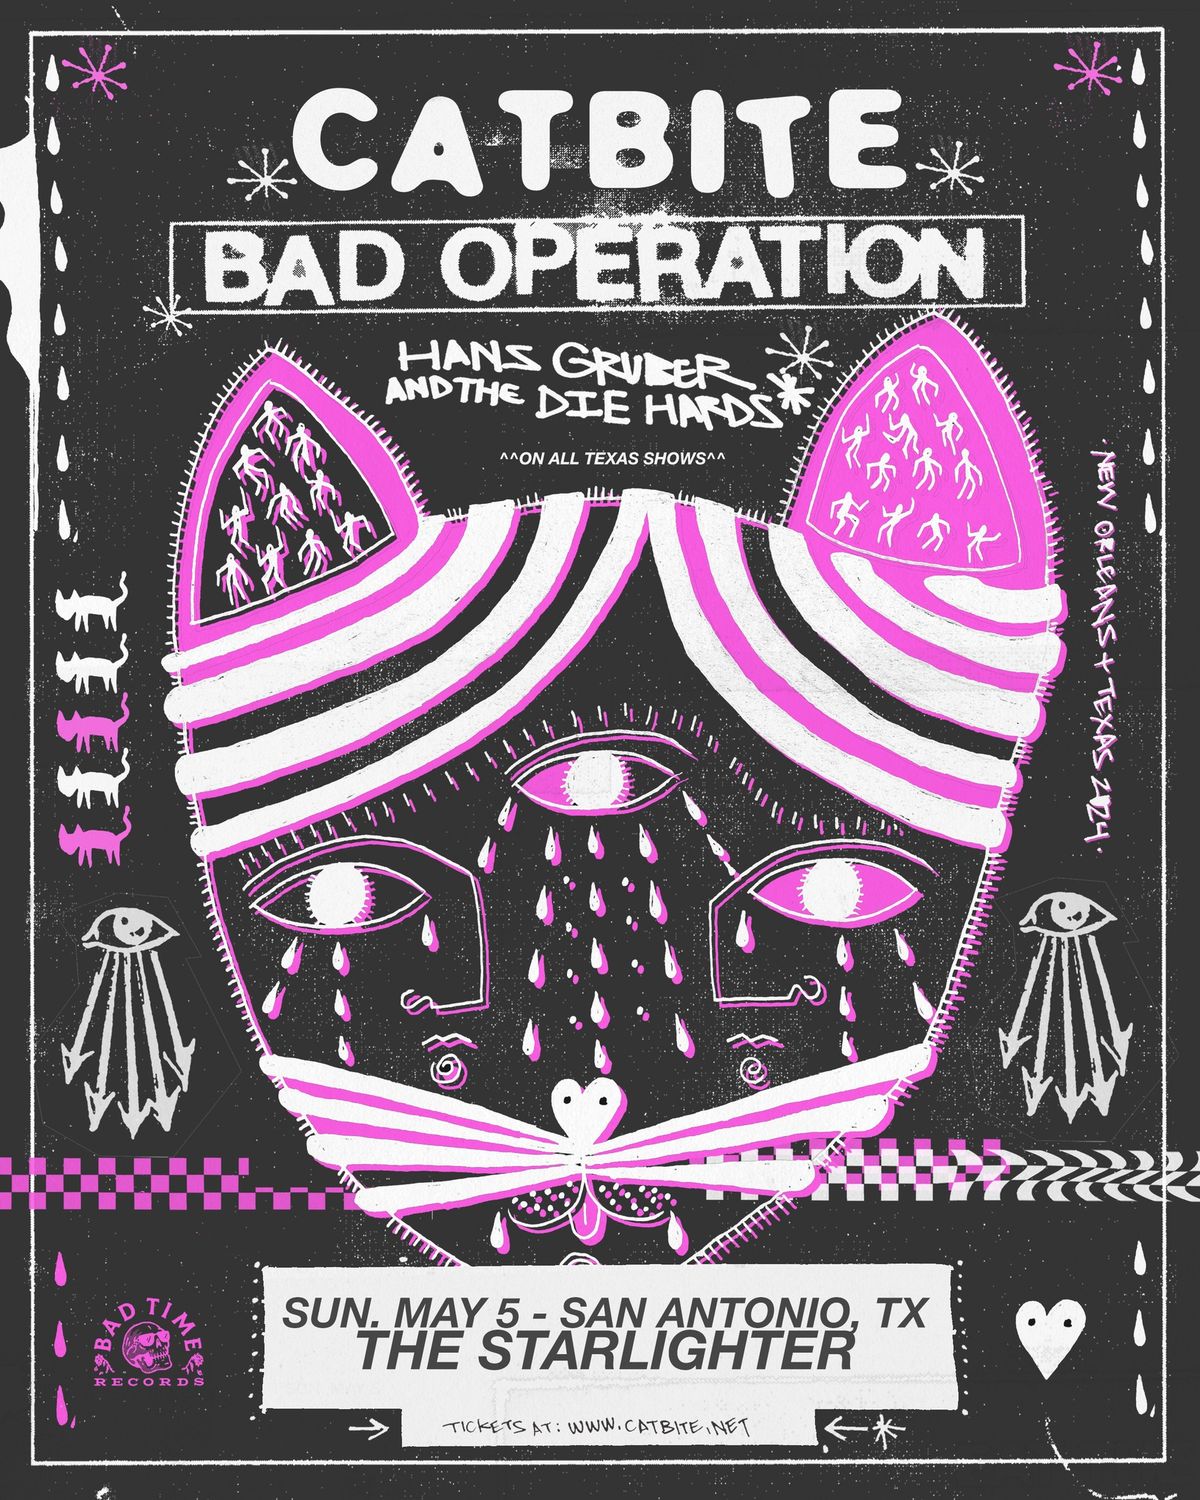 Catbite + Bad Operation + Hans Gruber & the Die Hards + Young Costello at The Starlighter!